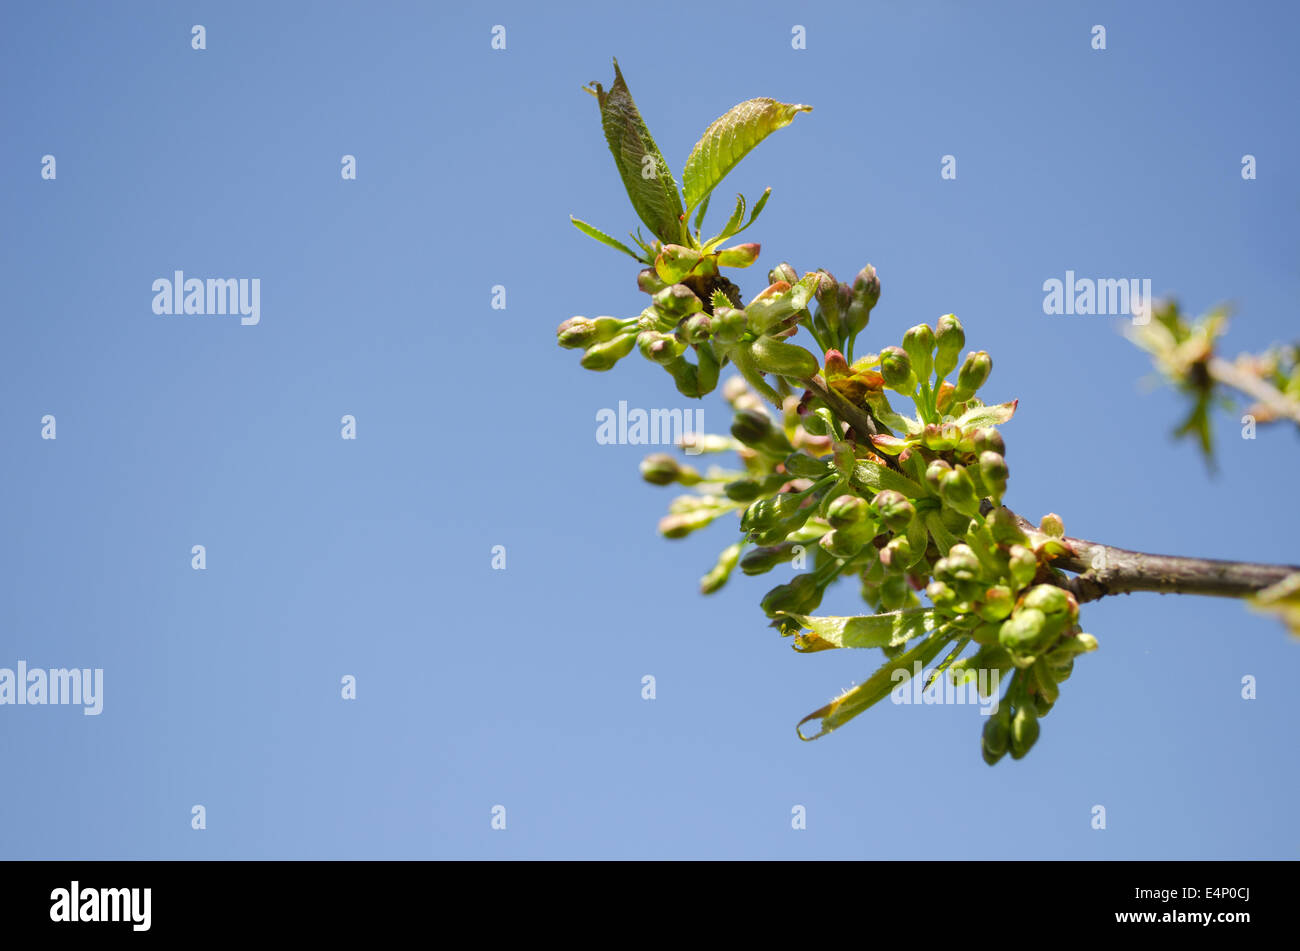 apple tree branch tip with green leaves and small buds on blue sky background Stock Photo